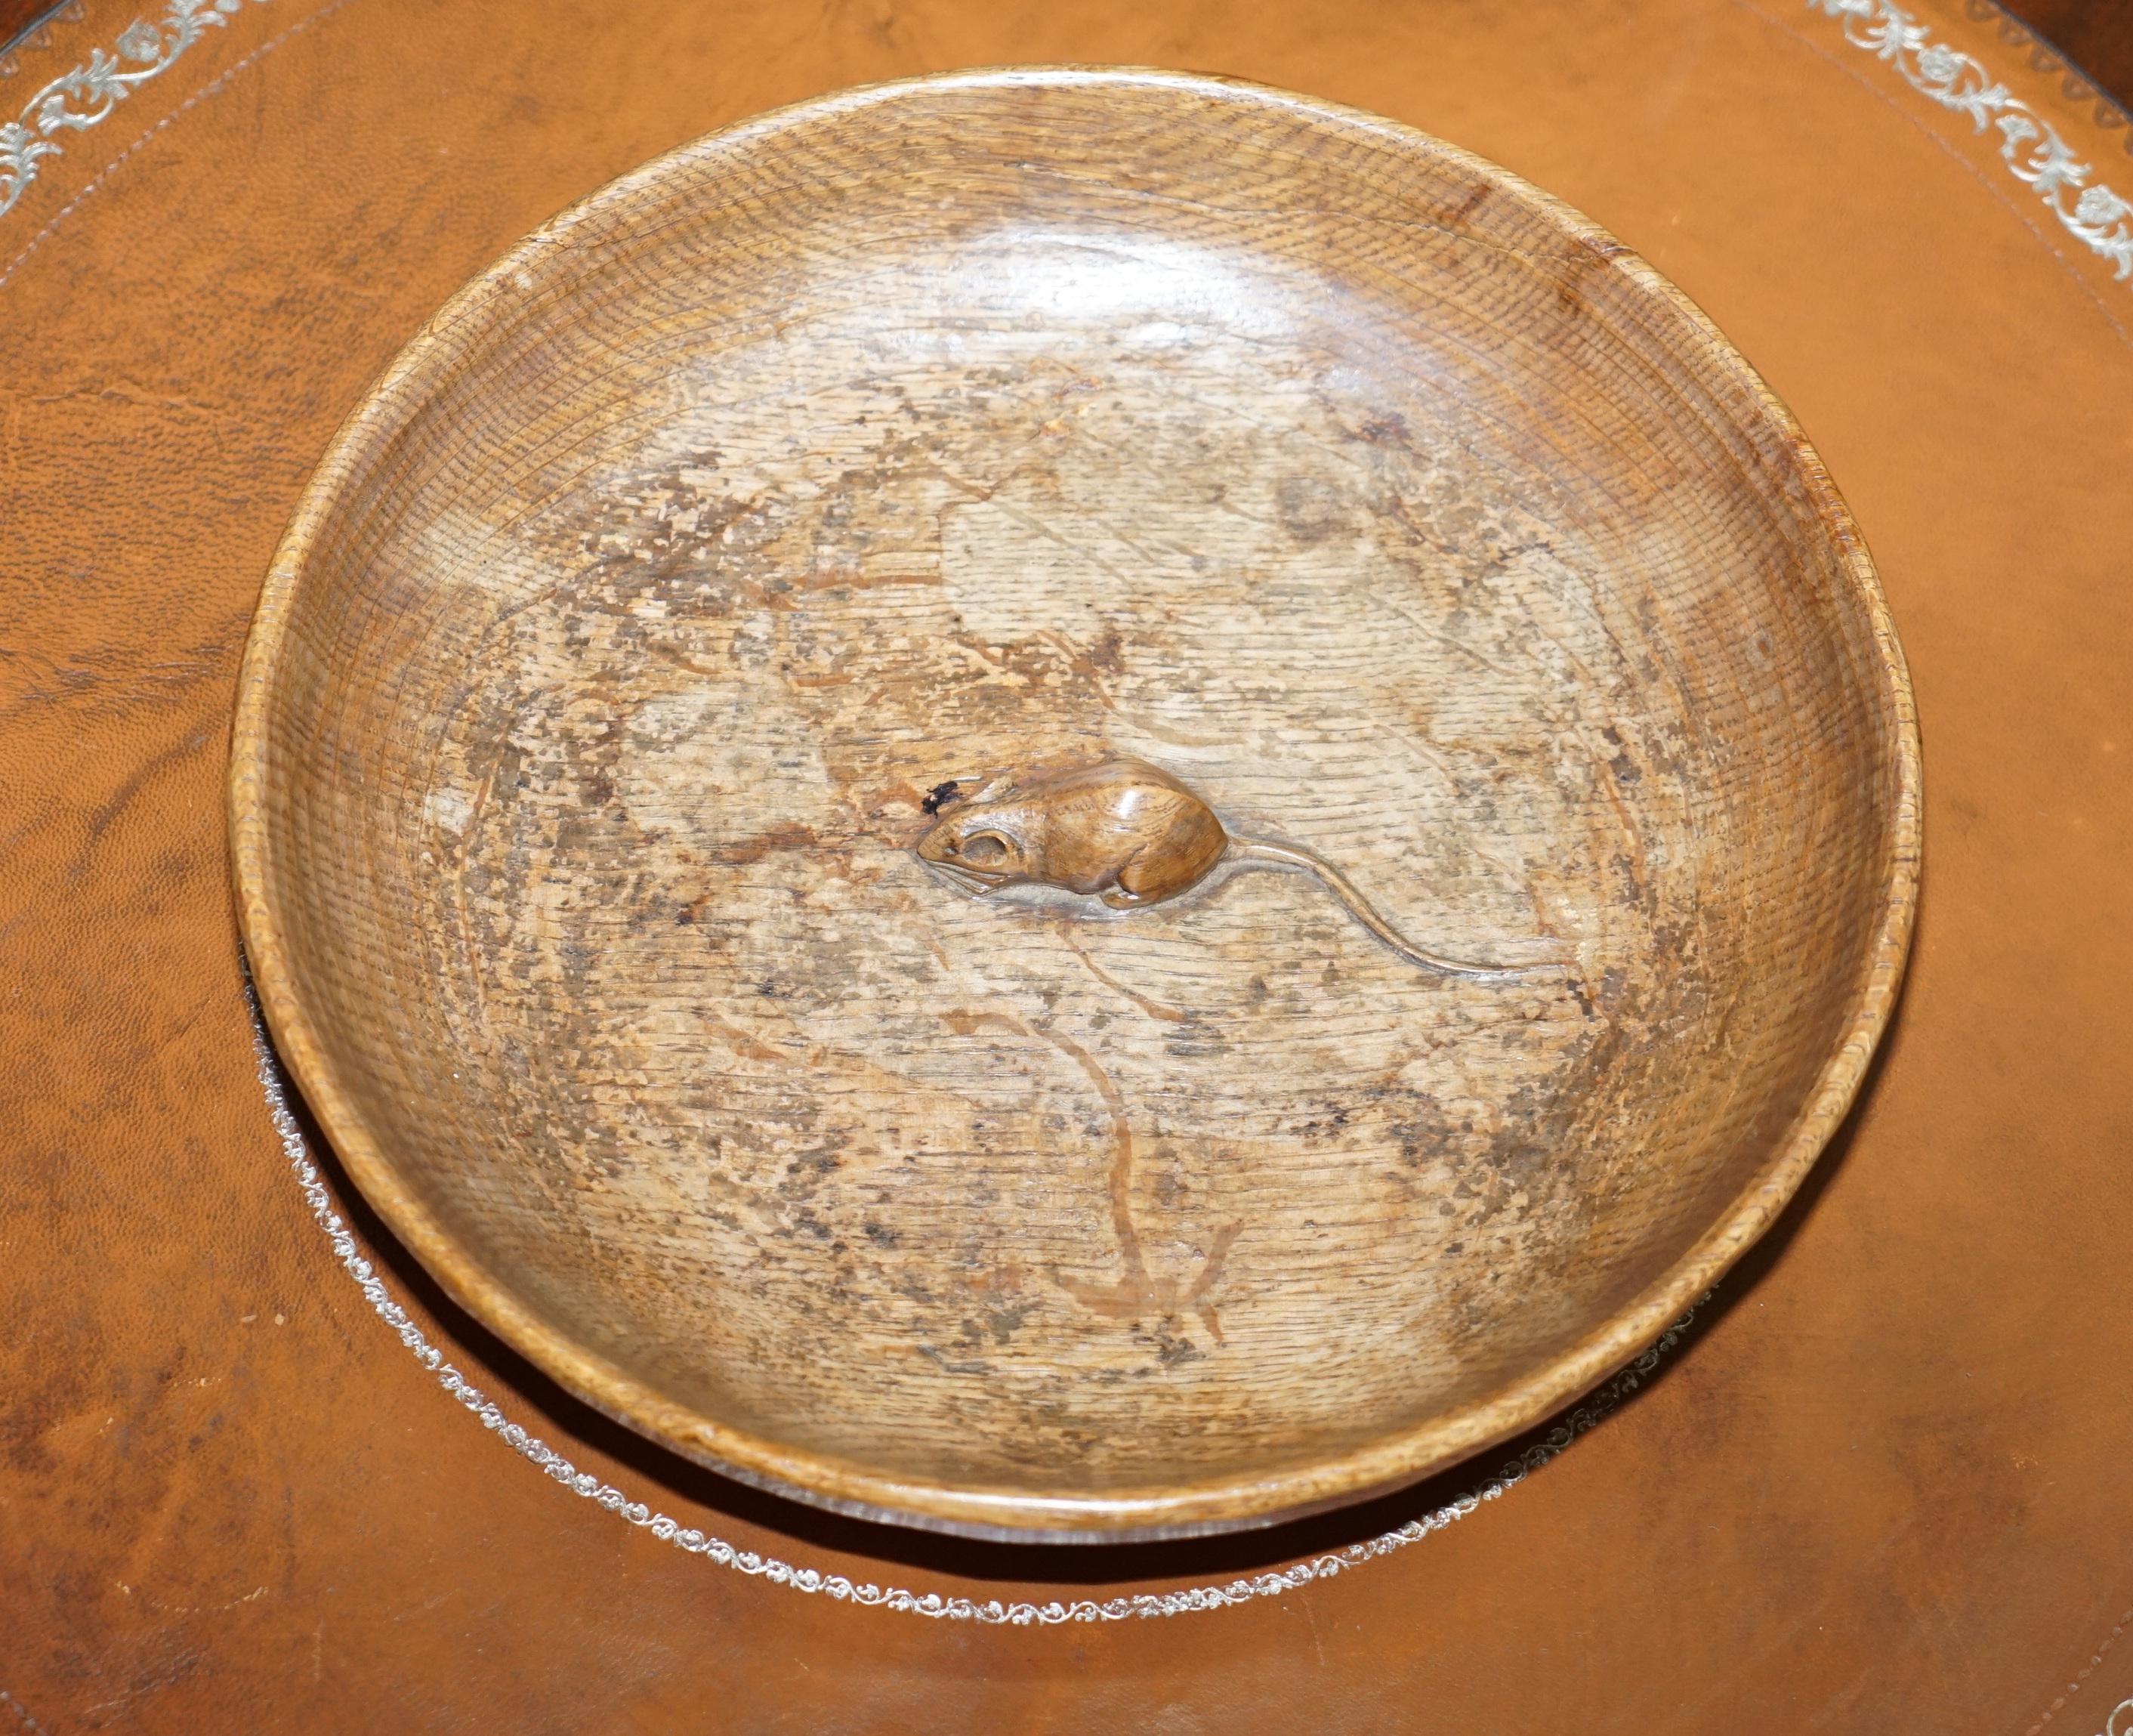 We are delighted to offer for sale this stunning original circa 1960s large Robert Thompson Mouseman fruit bowl

A stunning find, this piece has the mouse with the long tail and whiskers which means its an early example. It has the darker highly